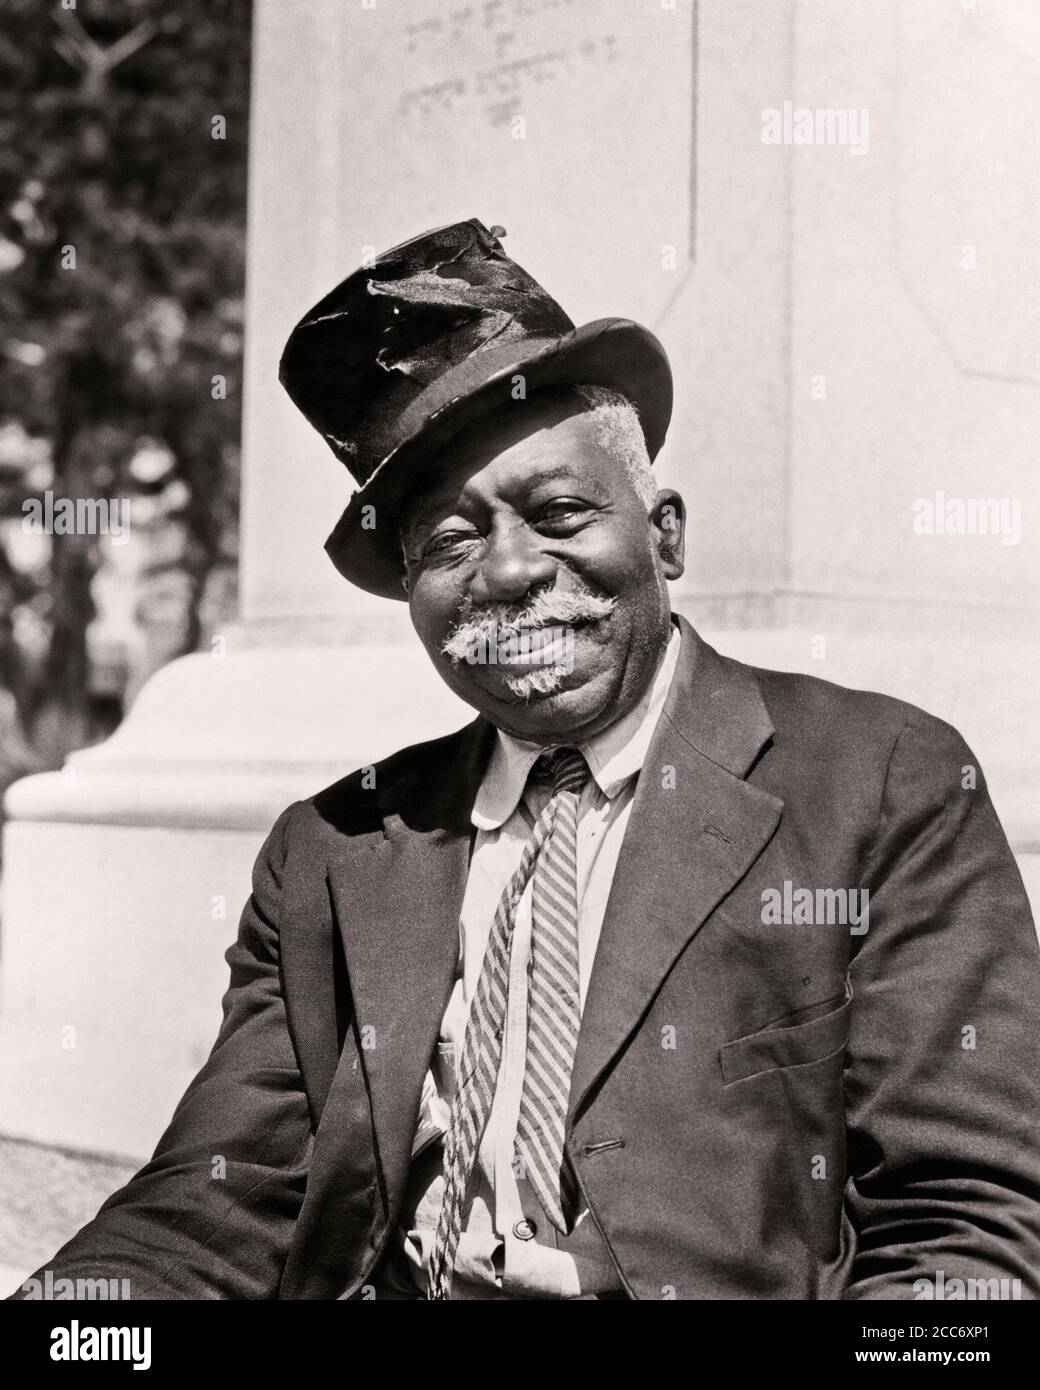 1930s SMILING AFRICAN-AMERICAN SENIOR MAN WEARING TOP HAT COAT TIE TOURIST COACHMAN LOOKING AT CAMERA ST. AUGUSTINE FLORIDA USA - n18 HAR001 HARS COPY SPACE HALF-LENGTH UNITED STATES OF AMERICA CHARACTER CONFIDENCE SENIOR MAN TRANSPORTATION SENIOR ADULT B&W NORTH AMERICA EYE CONTACT NORTH AMERICAN MUSTACHE SKILL SUIT AND TIE OCCUPATION HAPPINESS SKILLS CHEERFUL CUSTOMER SERVICE MUSTACHES AFRICAN-AMERICANS AFRICAN-AMERICAN TOURIST BLACK ETHNICITY PRIDE AUTHORITY FACIAL HAIR OCCUPATIONS SMILES CONCEPTUAL GUIDE JOYFUL STYLISH JOVIAL ST. AUGUSTINE TEAMSTER BATTERED FL BLACK AND WHITE HAR001 Stock Photo